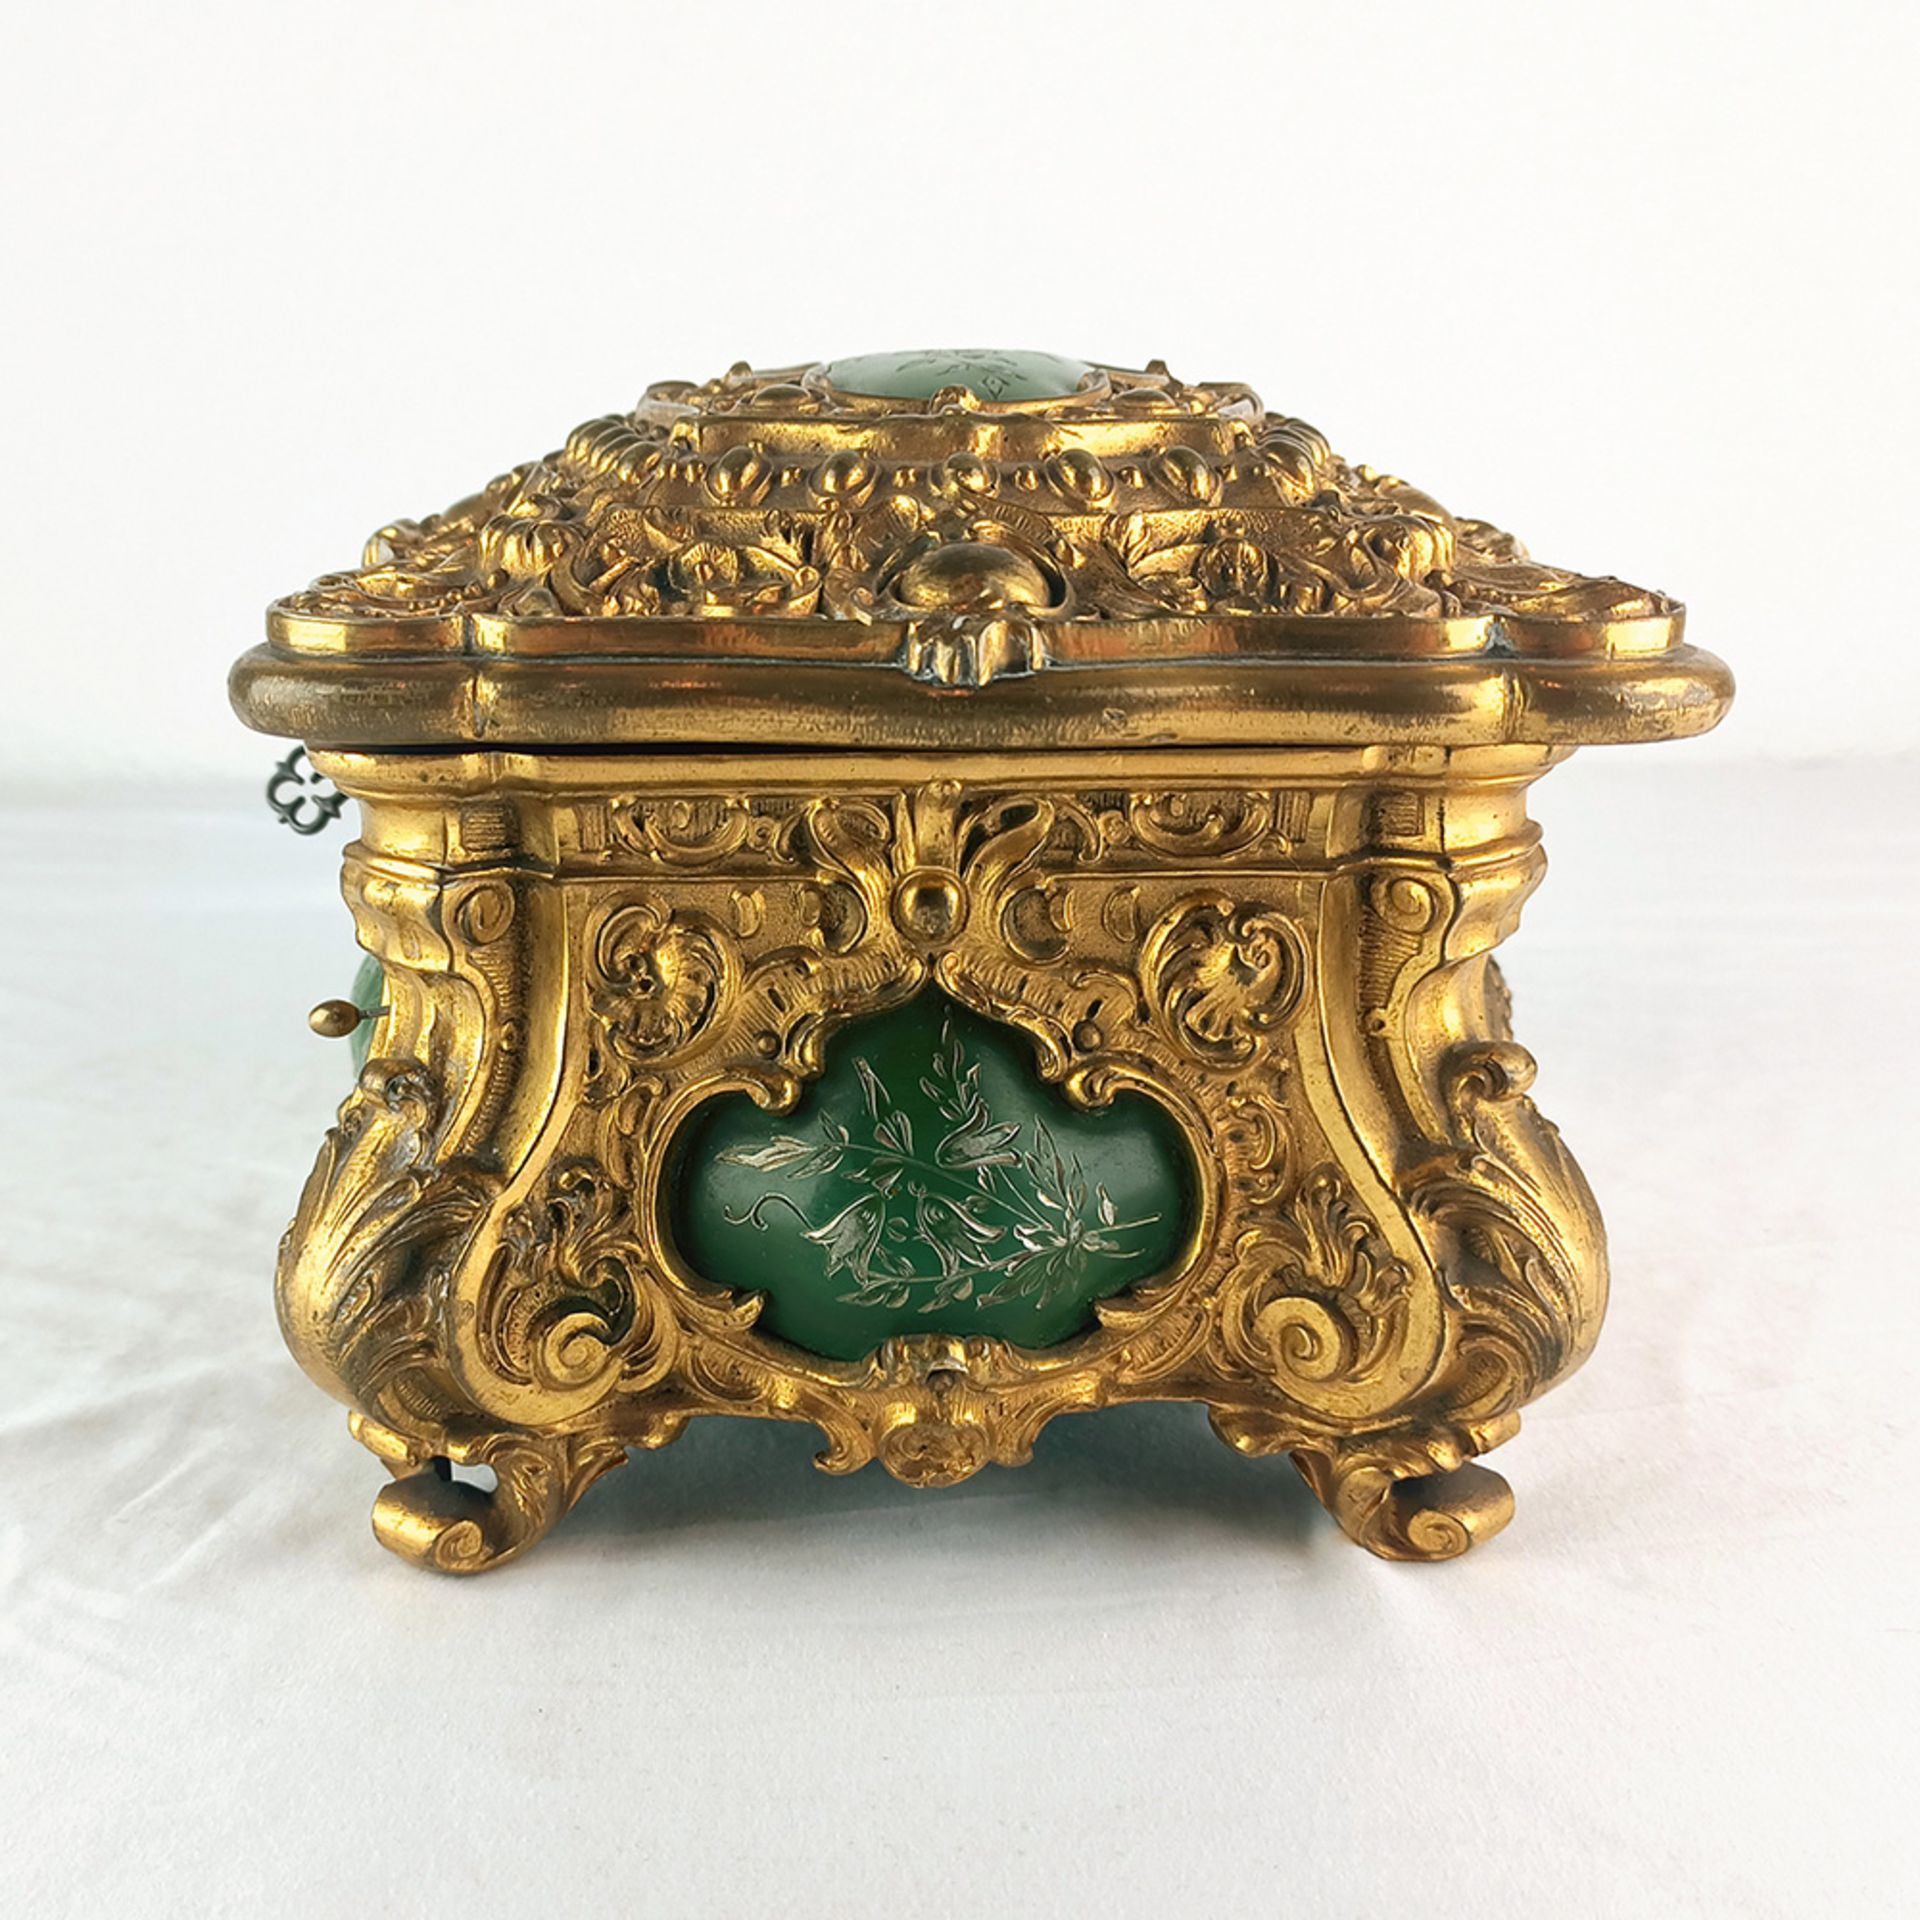 Unusual Brass and Horn Jewelry Music Box - Image 6 of 9